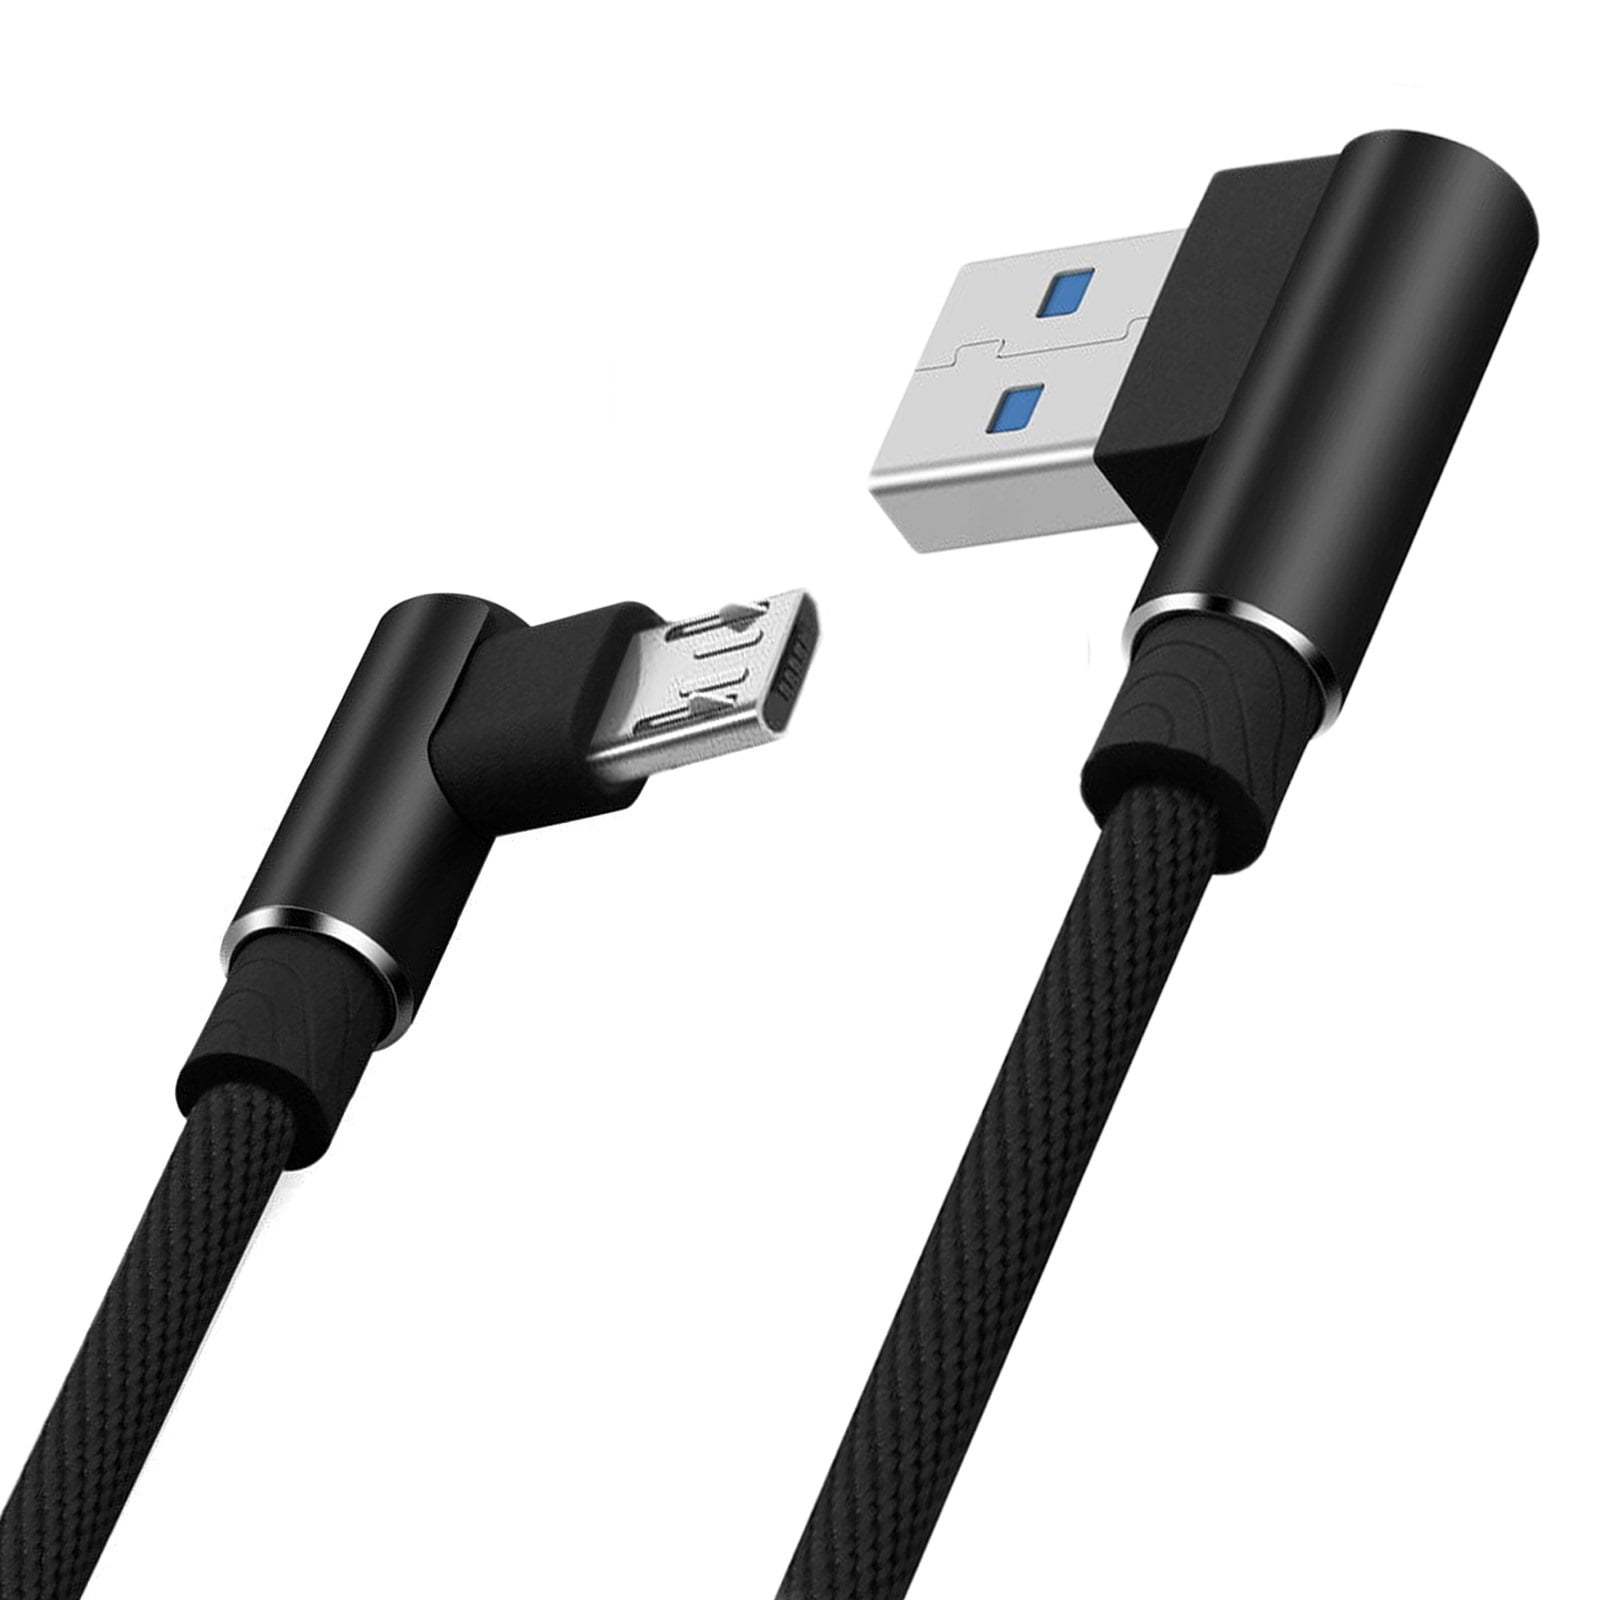 Witekey Black USB Charging Cable for Phone Travelling Home Office Android Left Angle to USB Left Bend 3m/9.8ft Easy-Charge 90 Degree Micro USB 